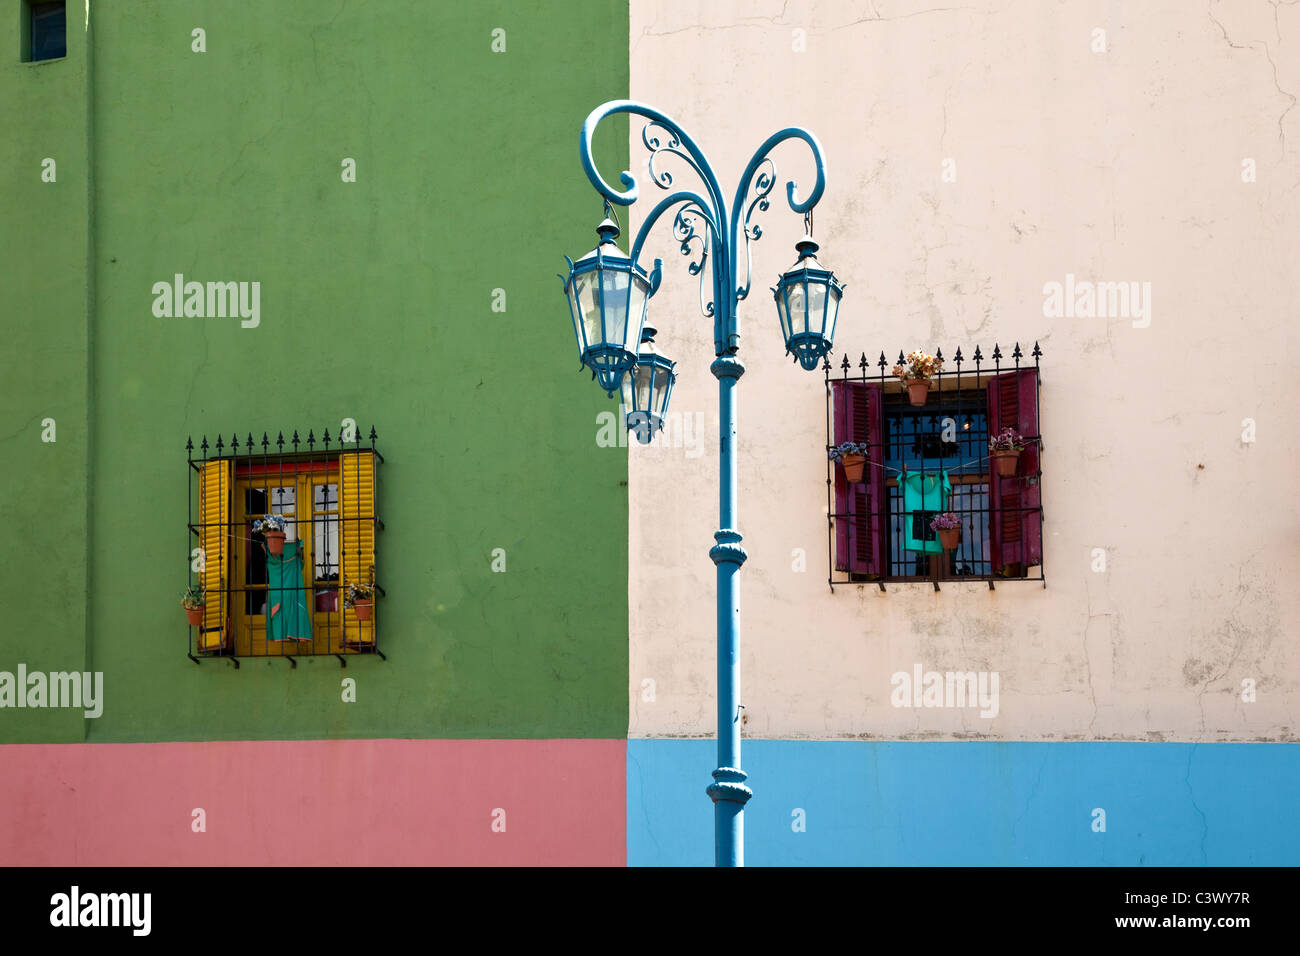 Colorfully painted buildings in the Caminito, La Boca district, Buenos Aires, Argentina, South America. Stock Photo